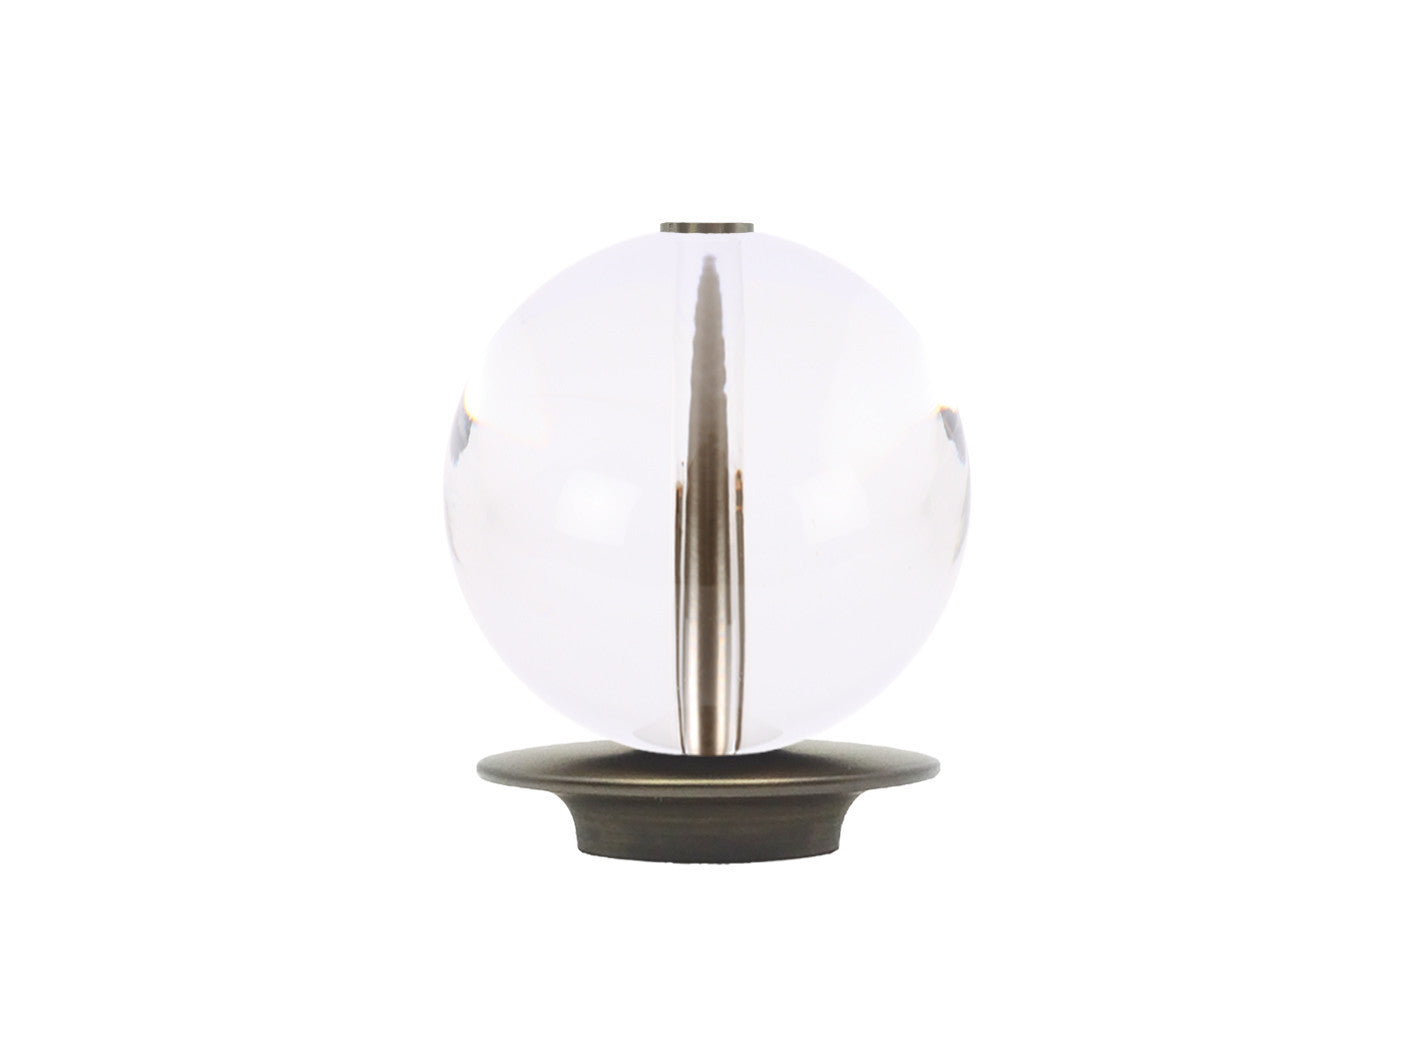 Acrylic ball finial for 30mm dia. curtain poles with brushed steel adapter